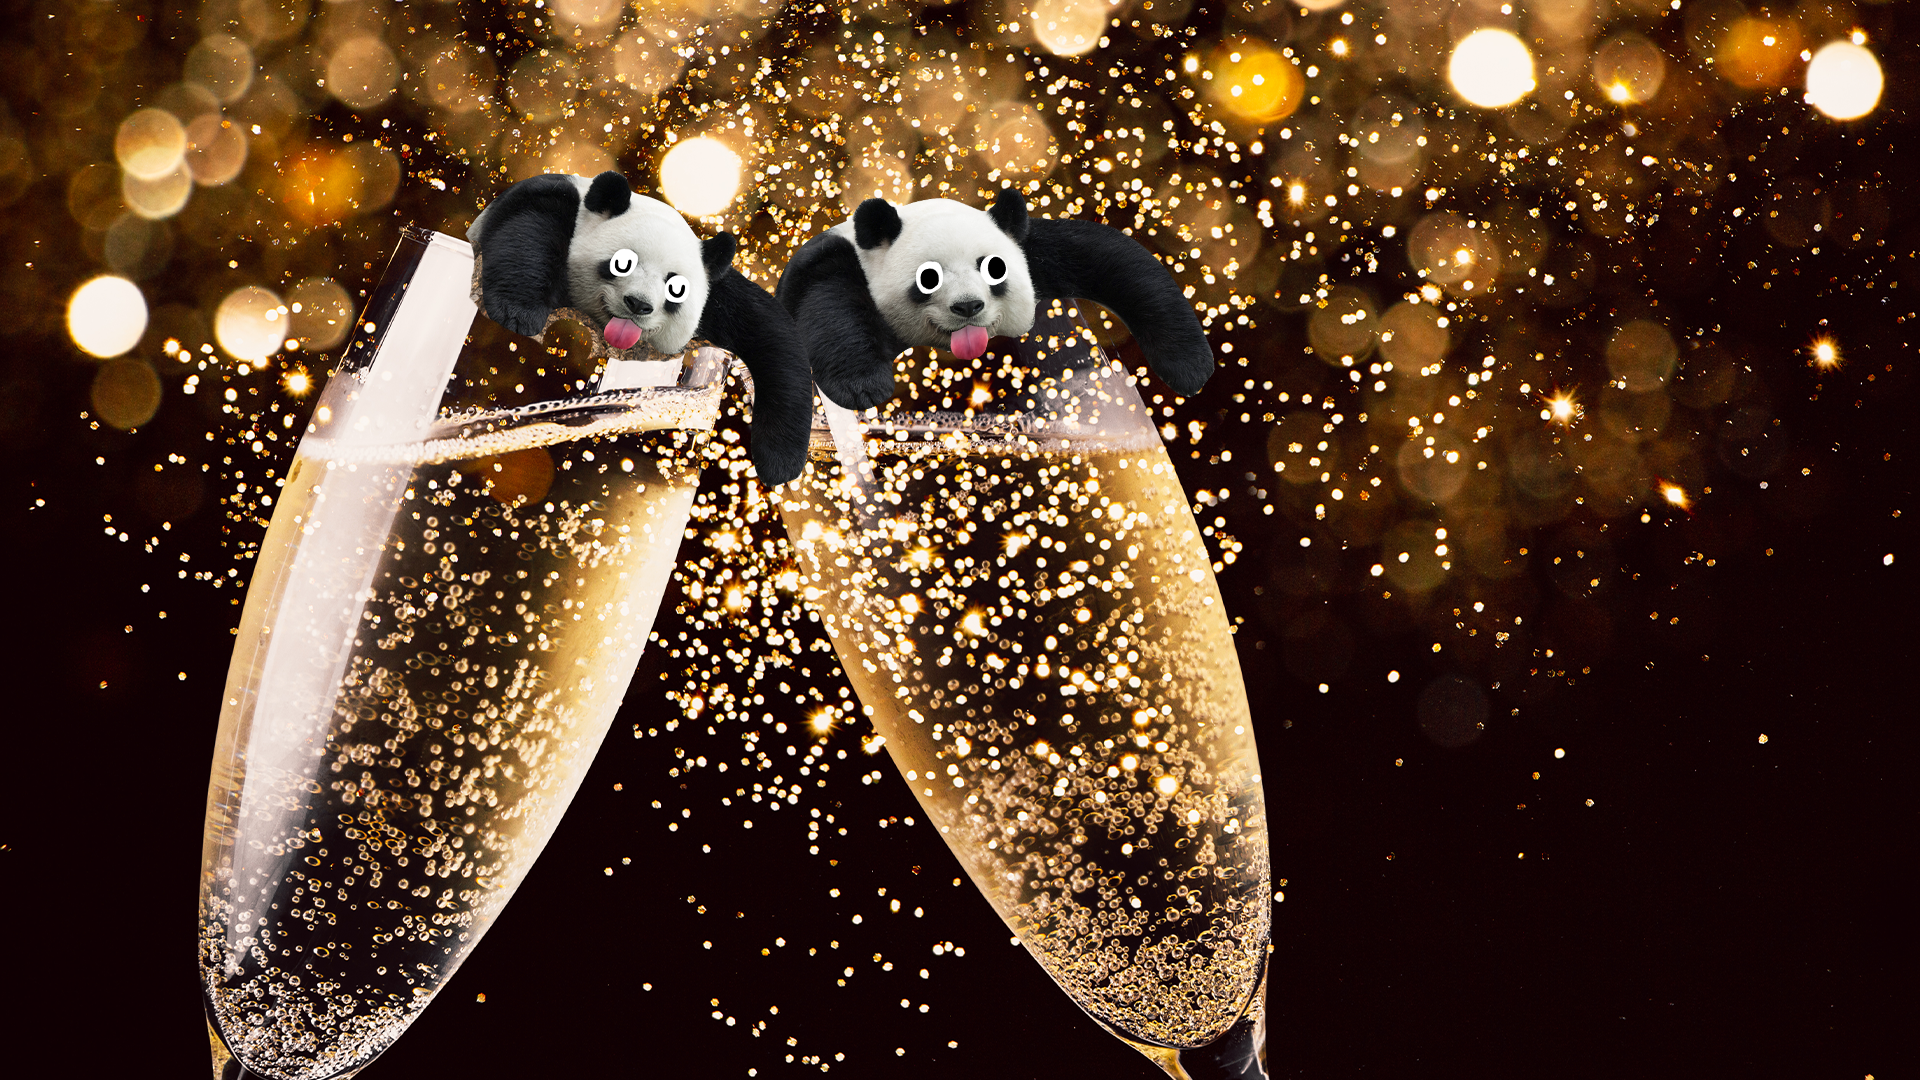 Two derpy pandas in champagne glasses